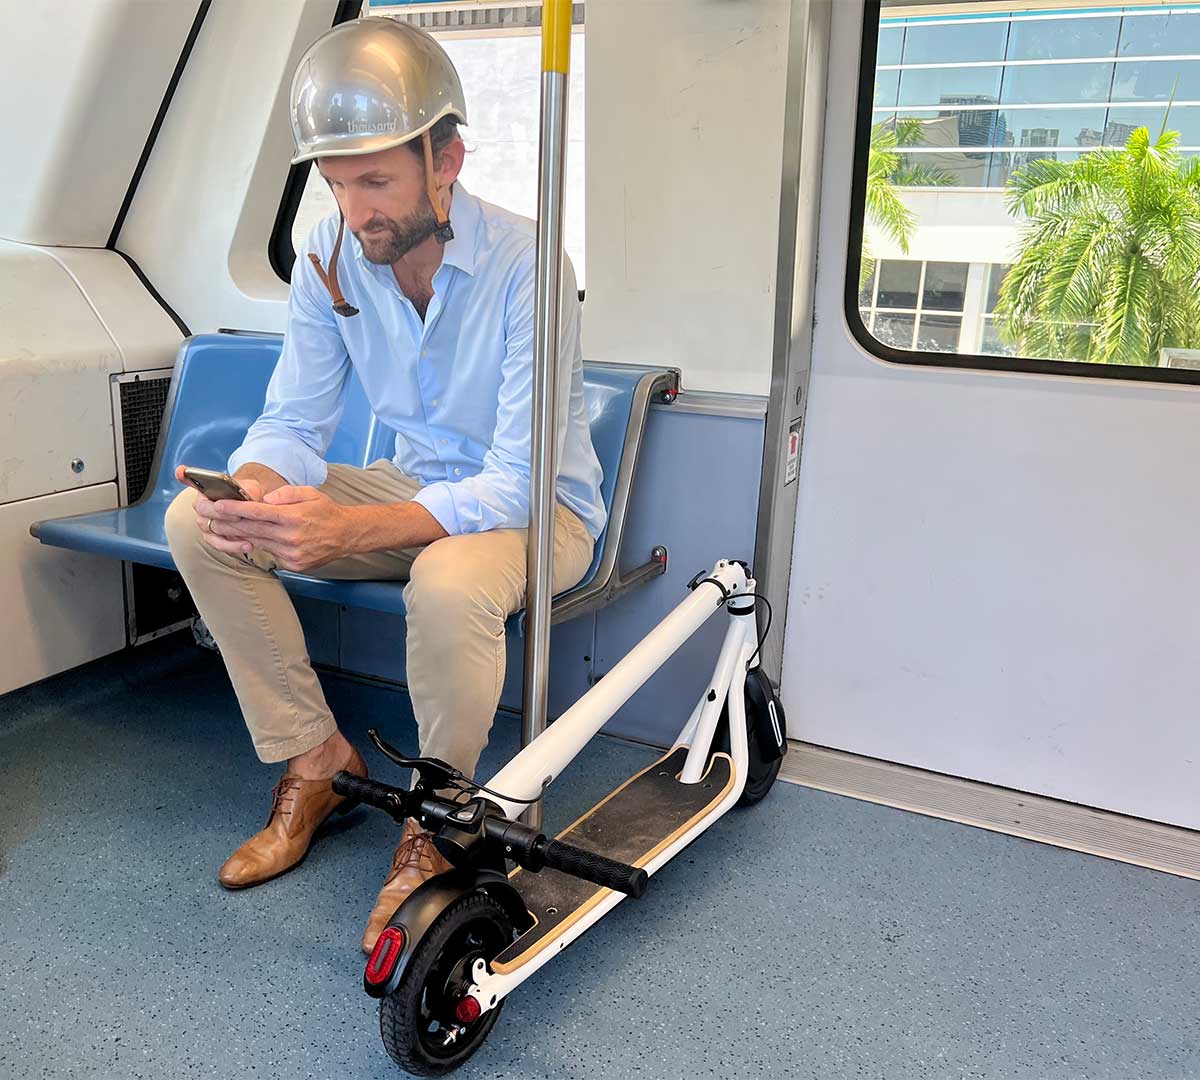 A commuter in smart casual attire sits on public transport, engrossed in his smartphone, with a portable electric scooter by his side, showcasing the innovative integration of personal electric vehicles in daily transit.